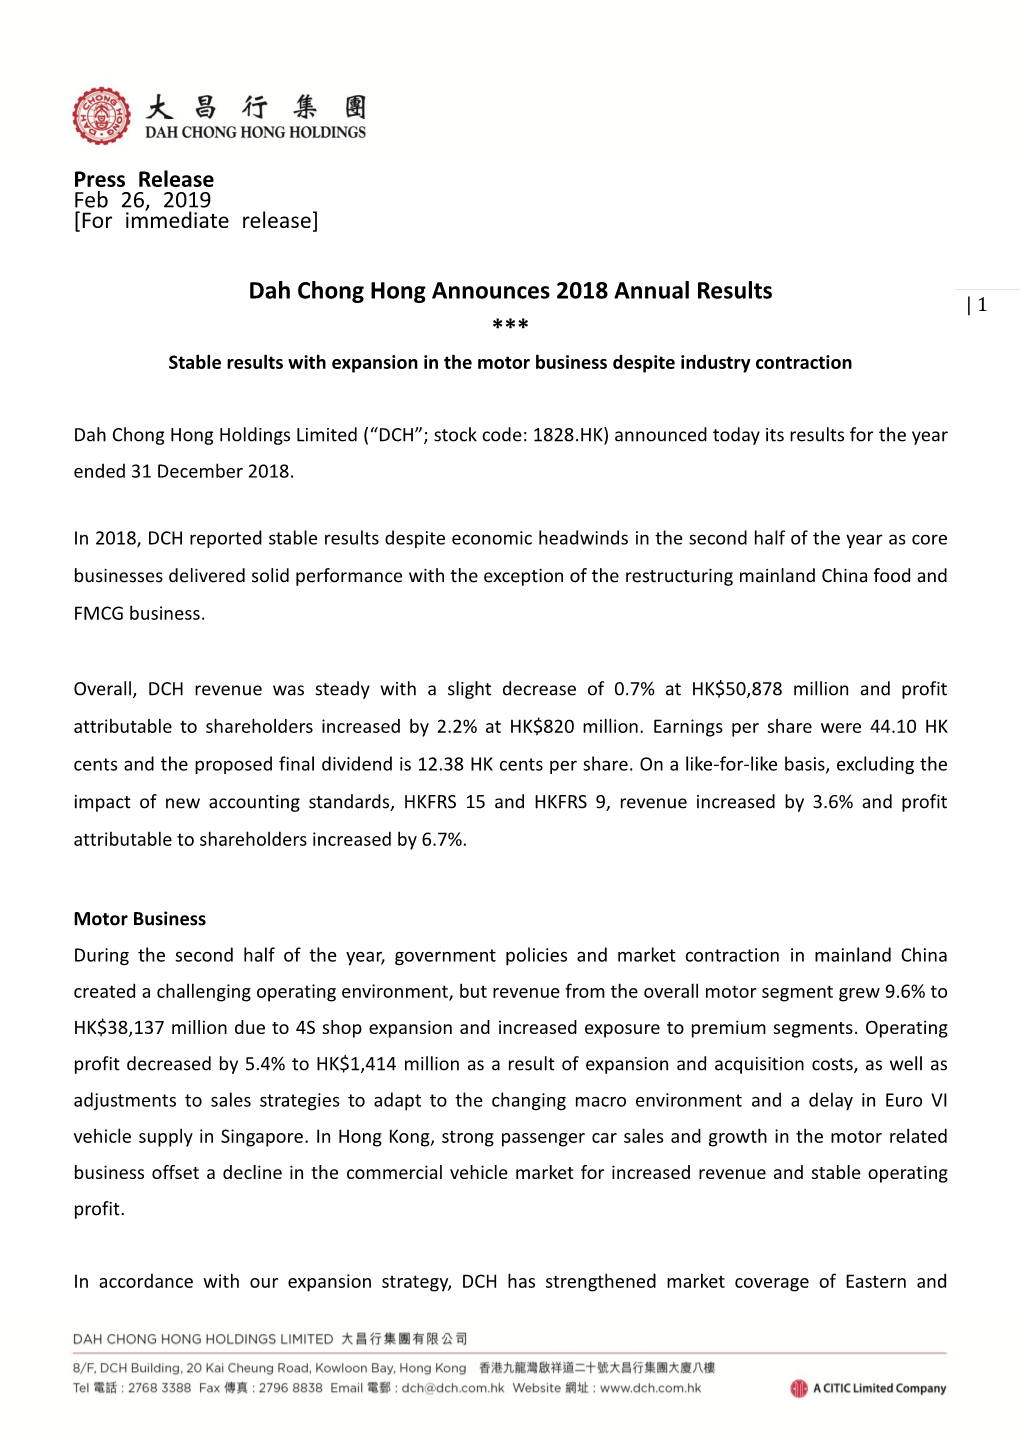 Dah Chong Hong Announces 2018 Annual Results | 1 *** Stable Results with Expansion in the Motor Business Despite Industry Contraction